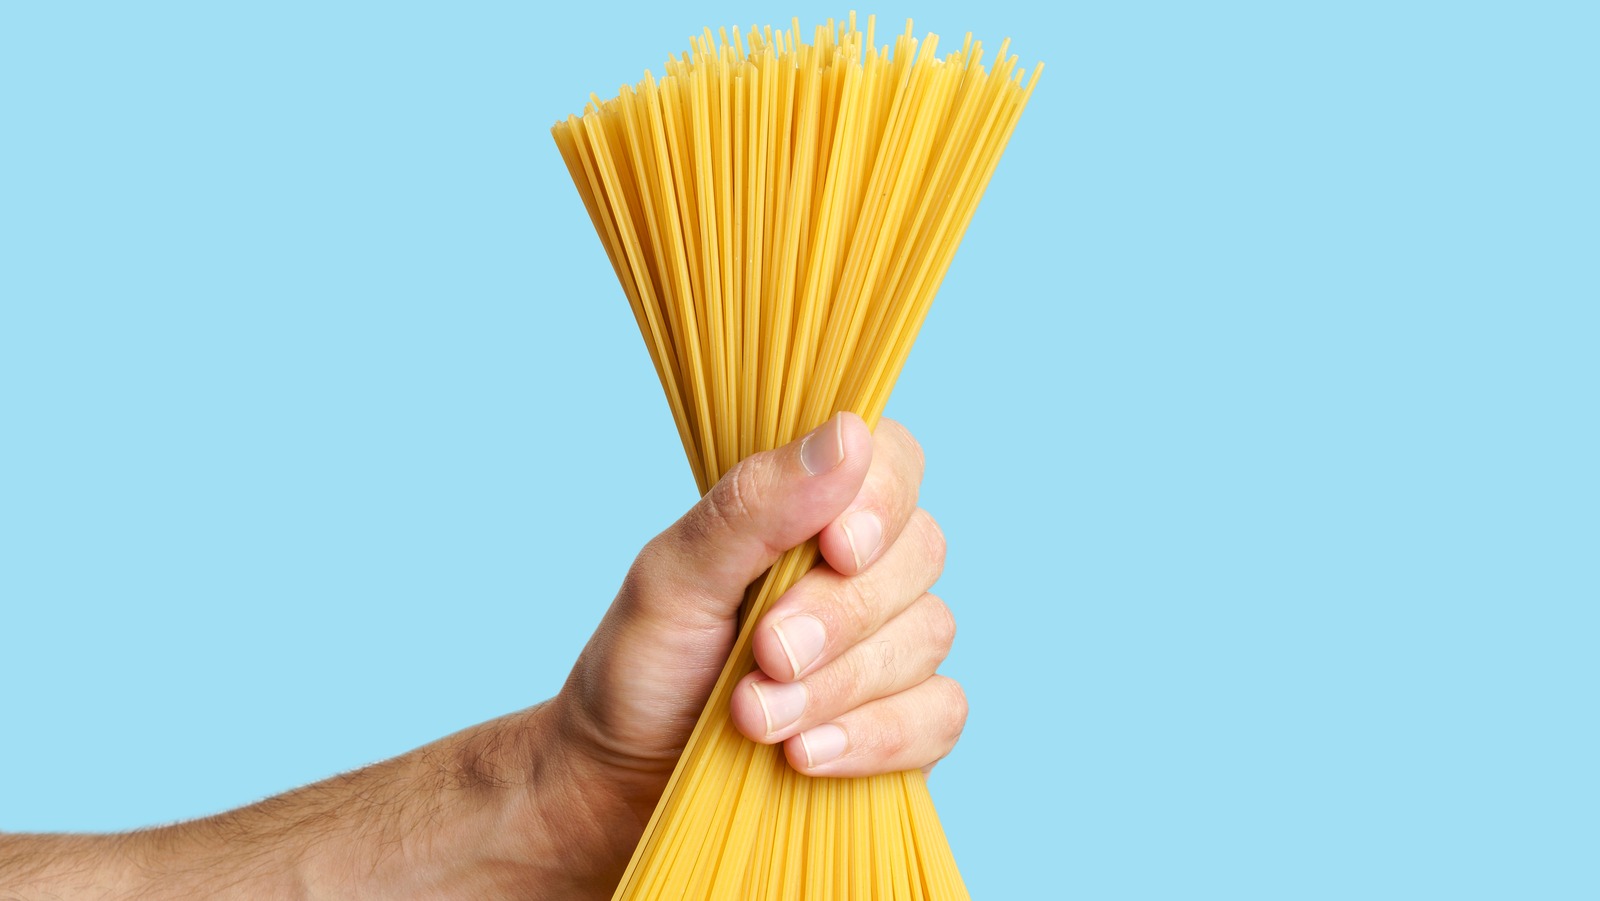 https://www.tastingtable.com/img/gallery/13-boxed-spaghetti-noodle-brands-ranked-worst-to-best/l-intro-1677534107.jpg